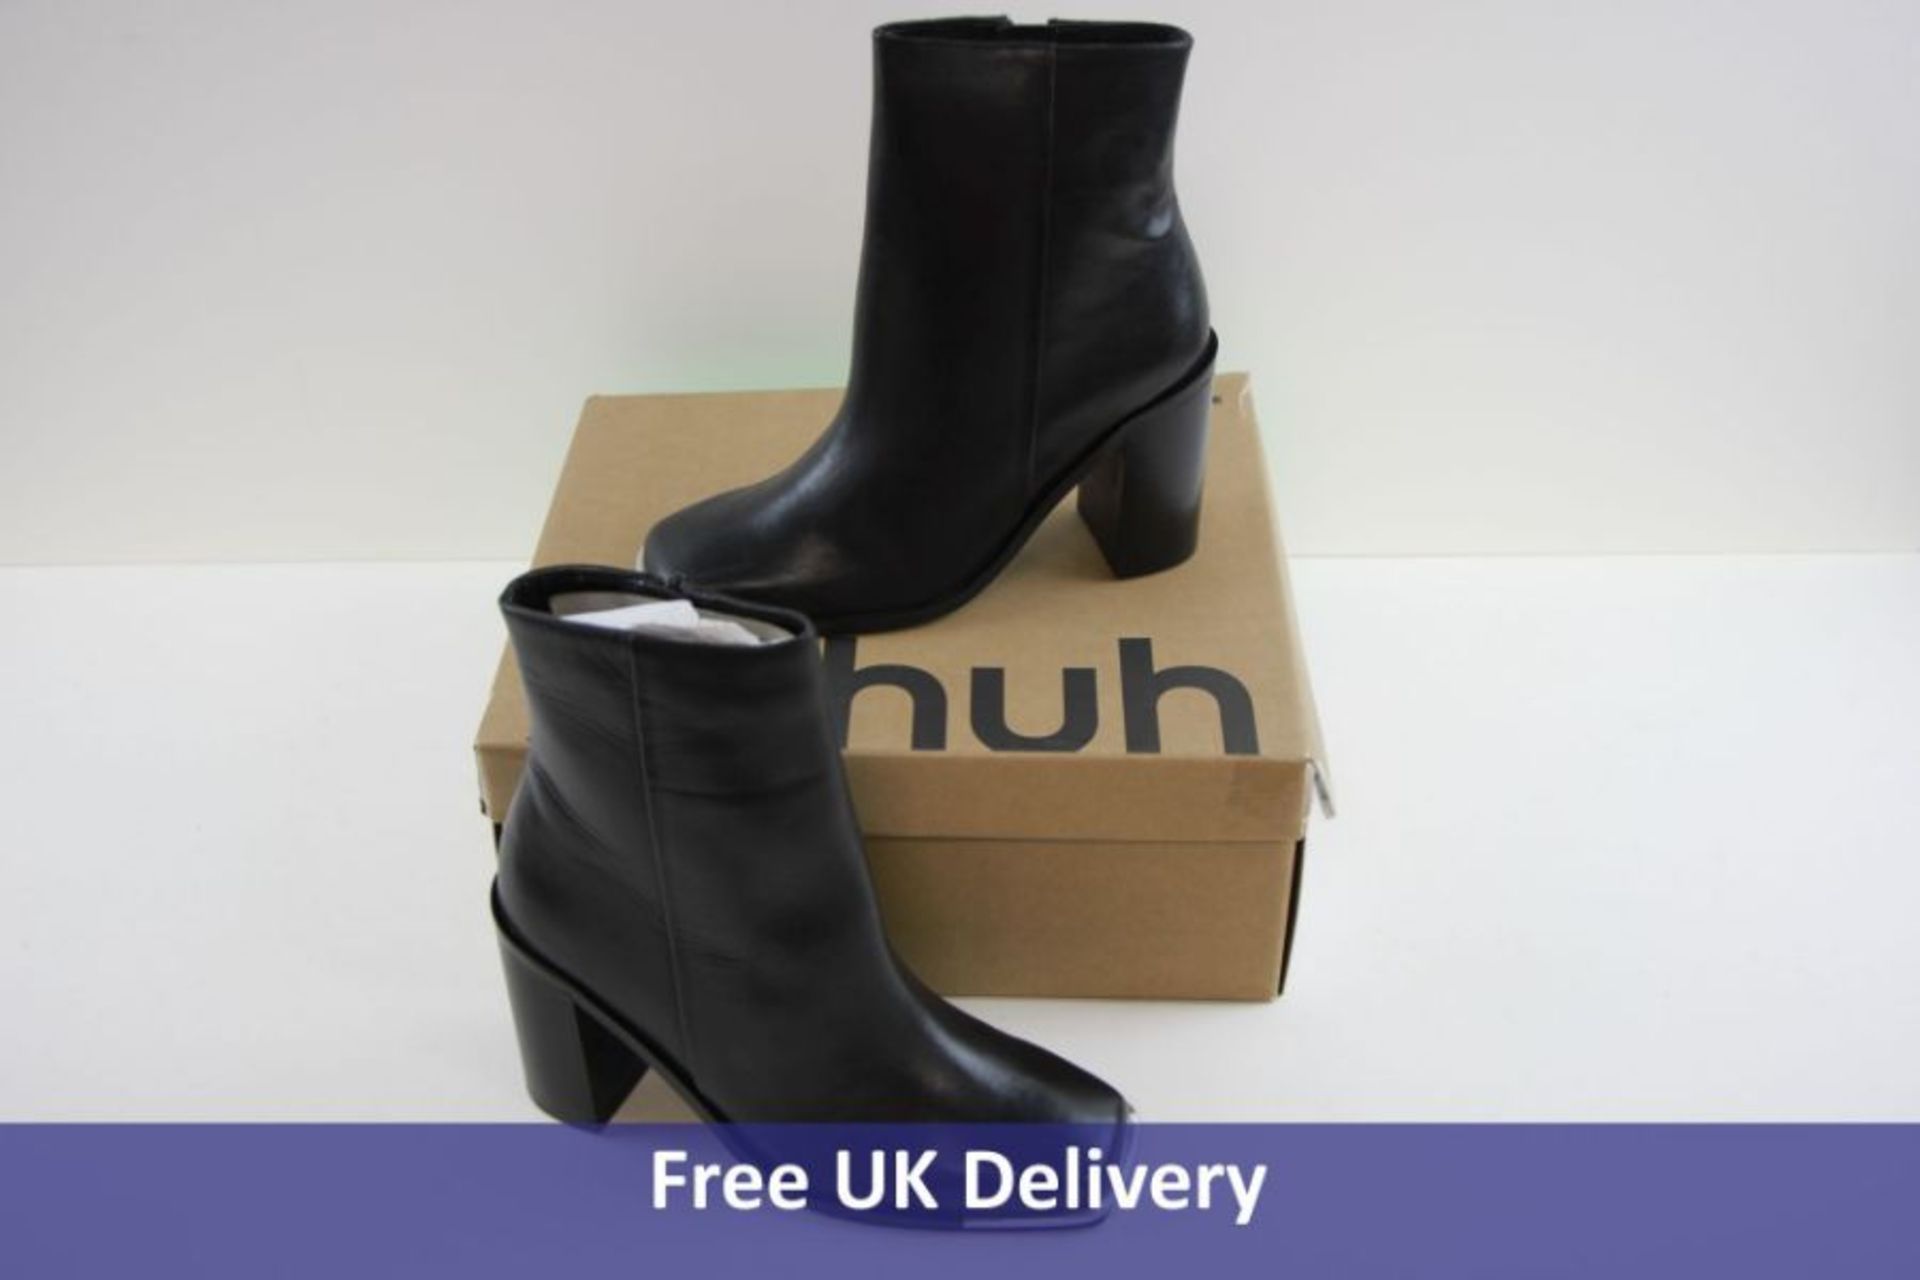 Schuh Women's Byron Leather Square toe Boots, Black, UK 4